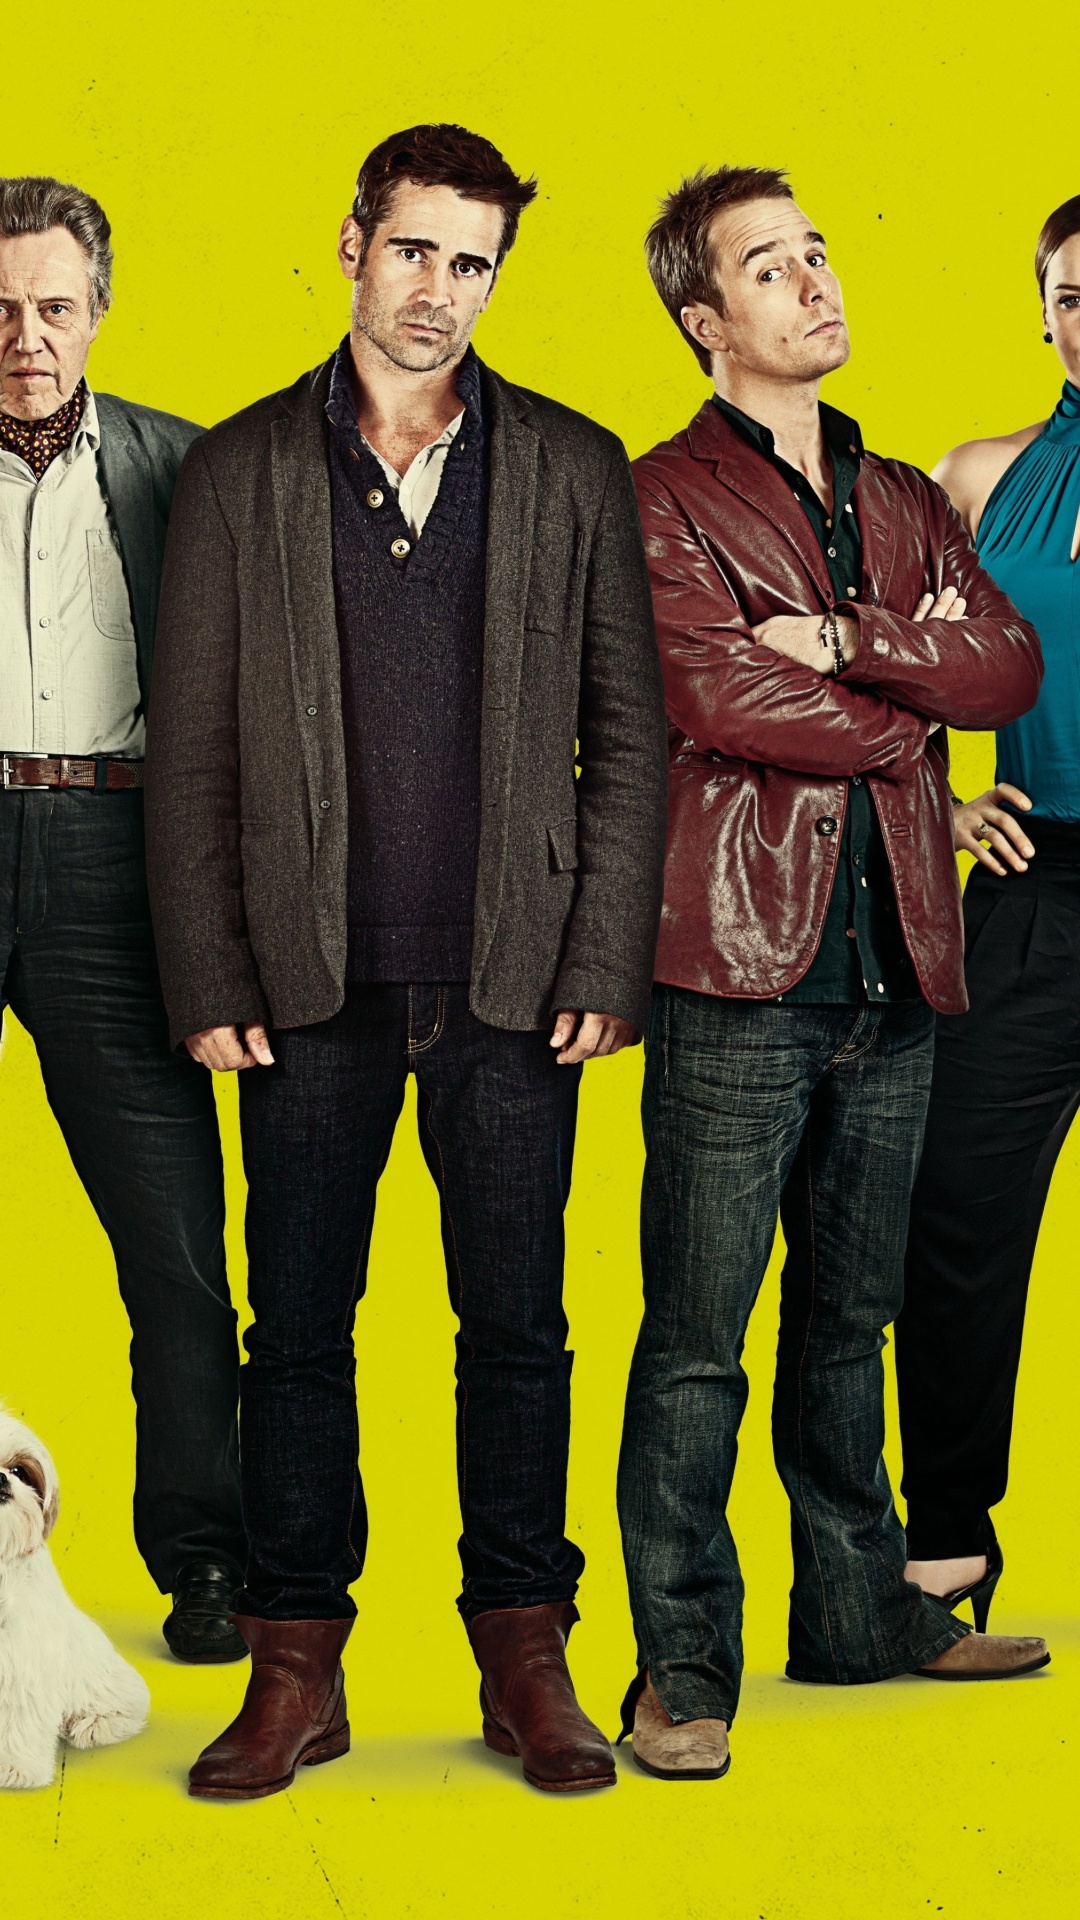 Das Seven Psychopaths with Colin Farrell and Sam Rockwell Wallpaper 1080x1920